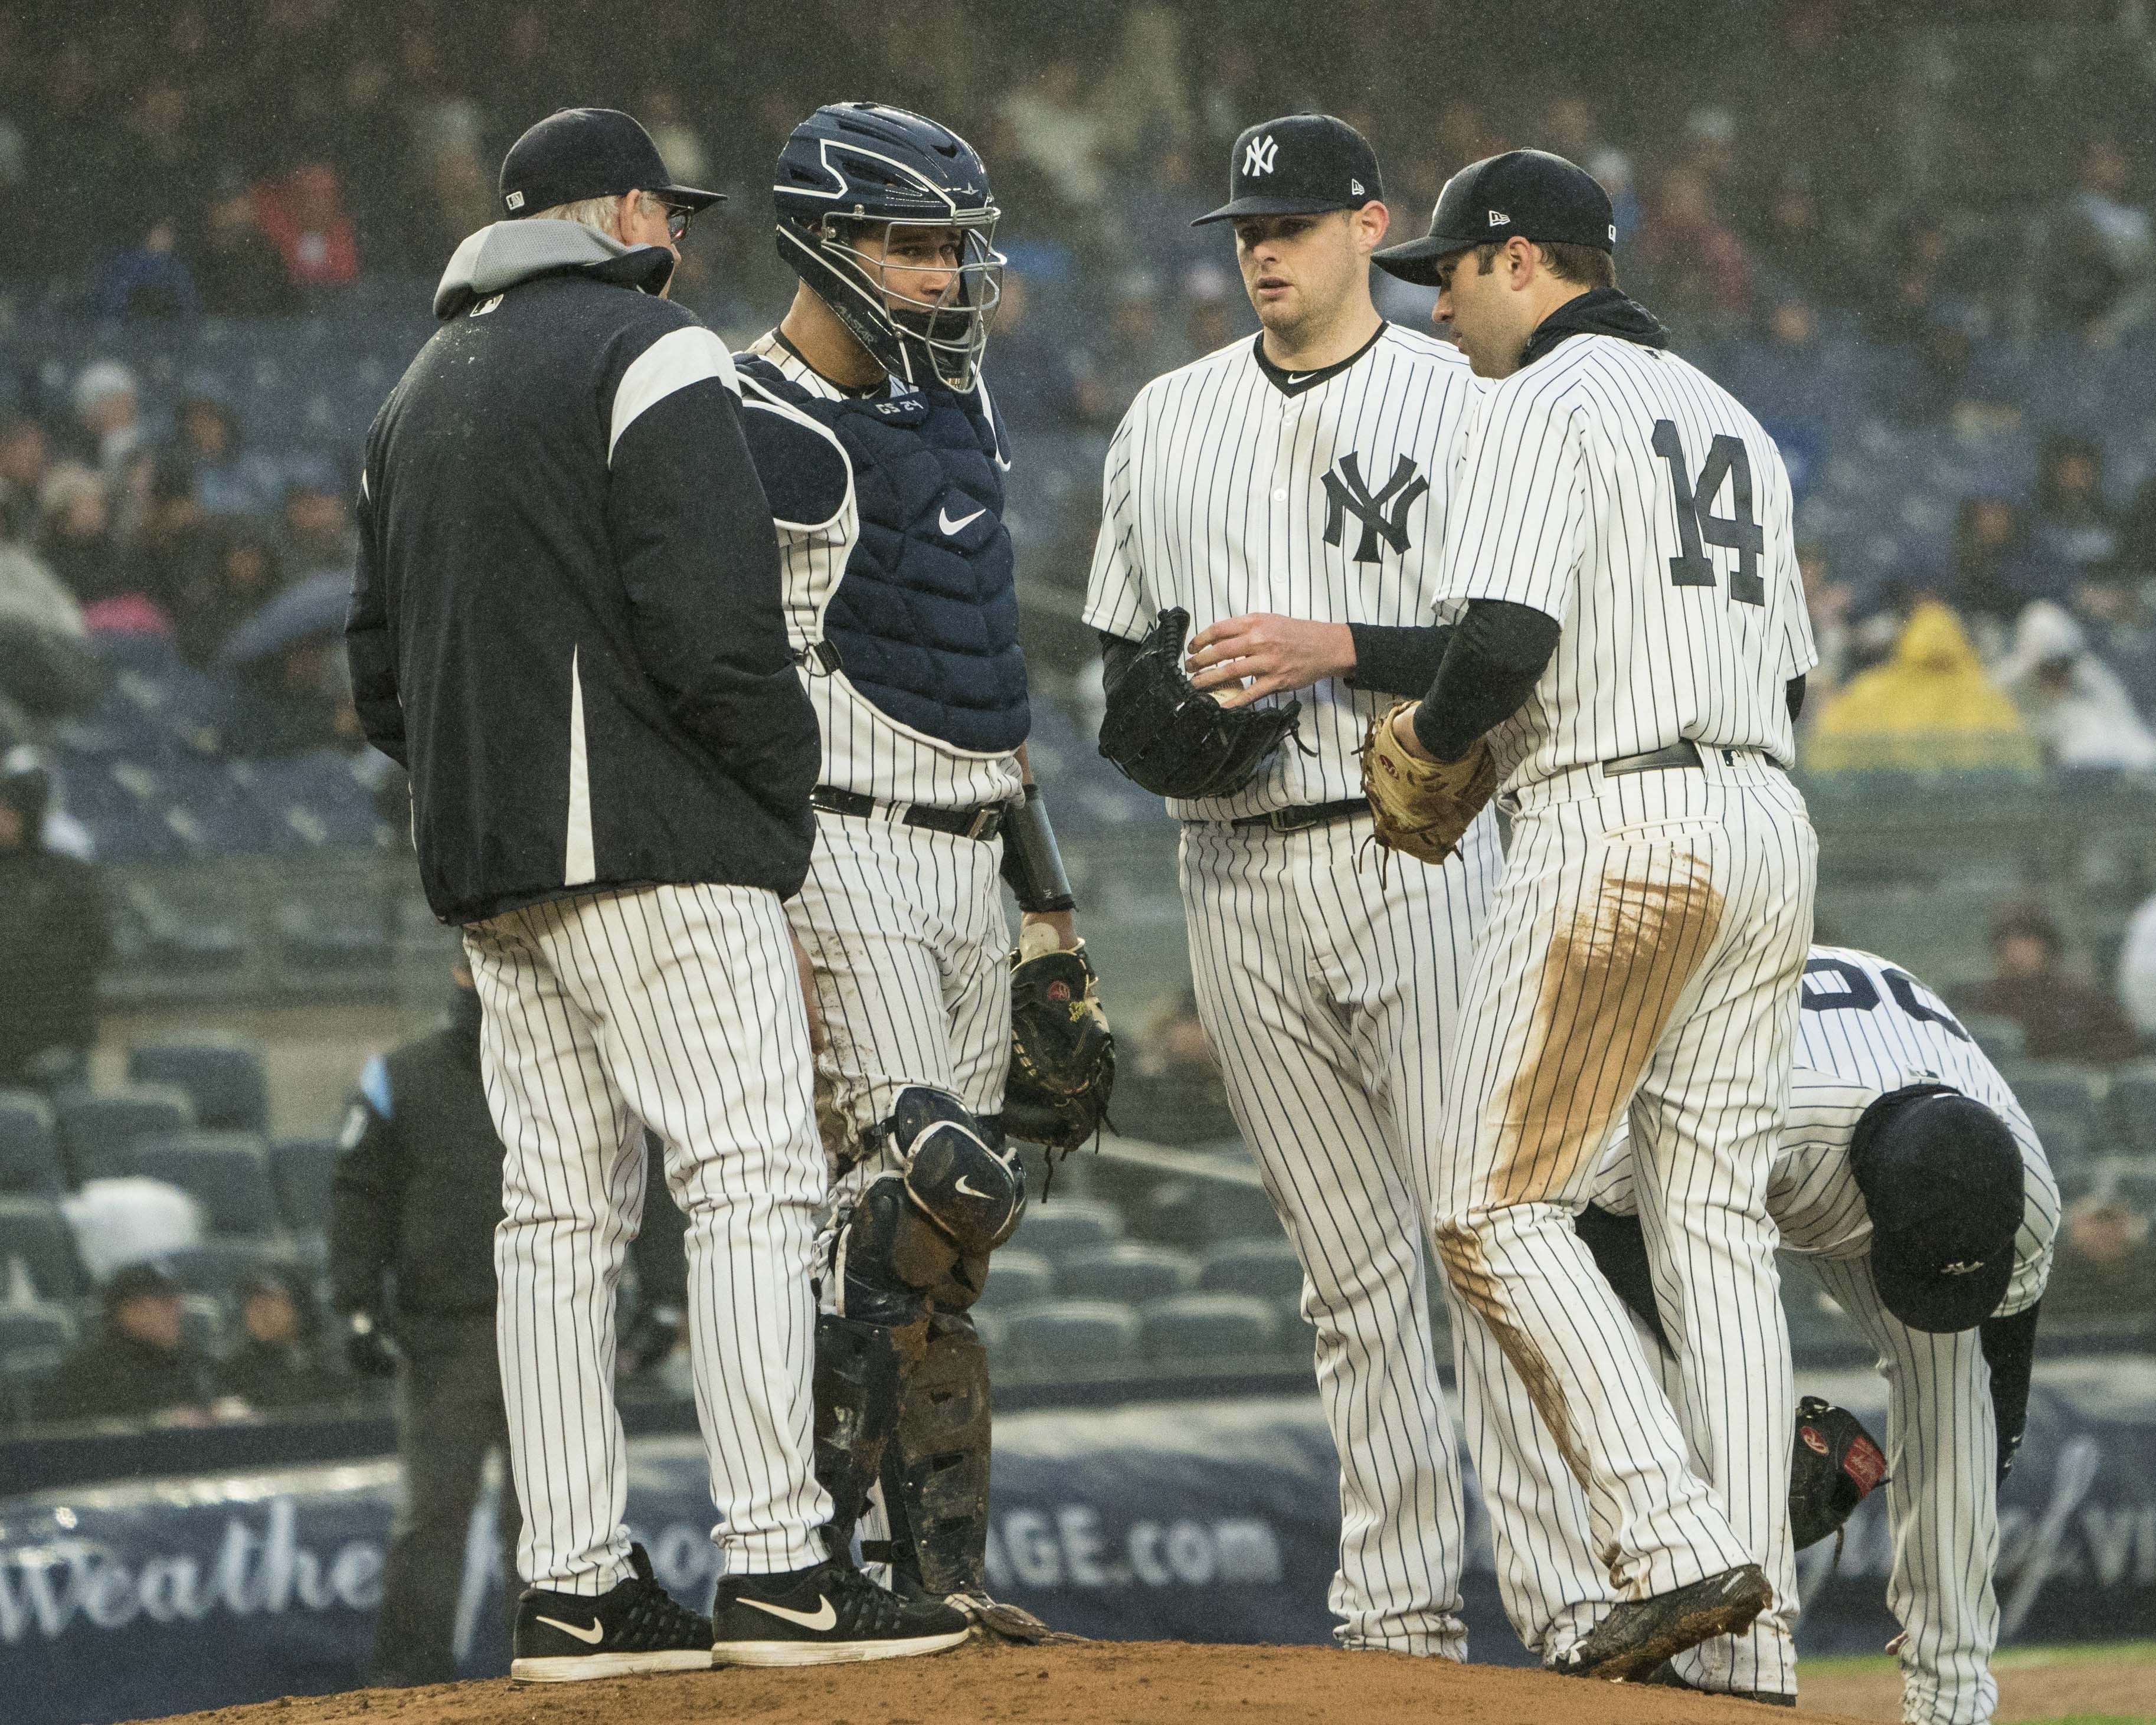 New York Yankees The 2020 roster is already set, changes are unlikely